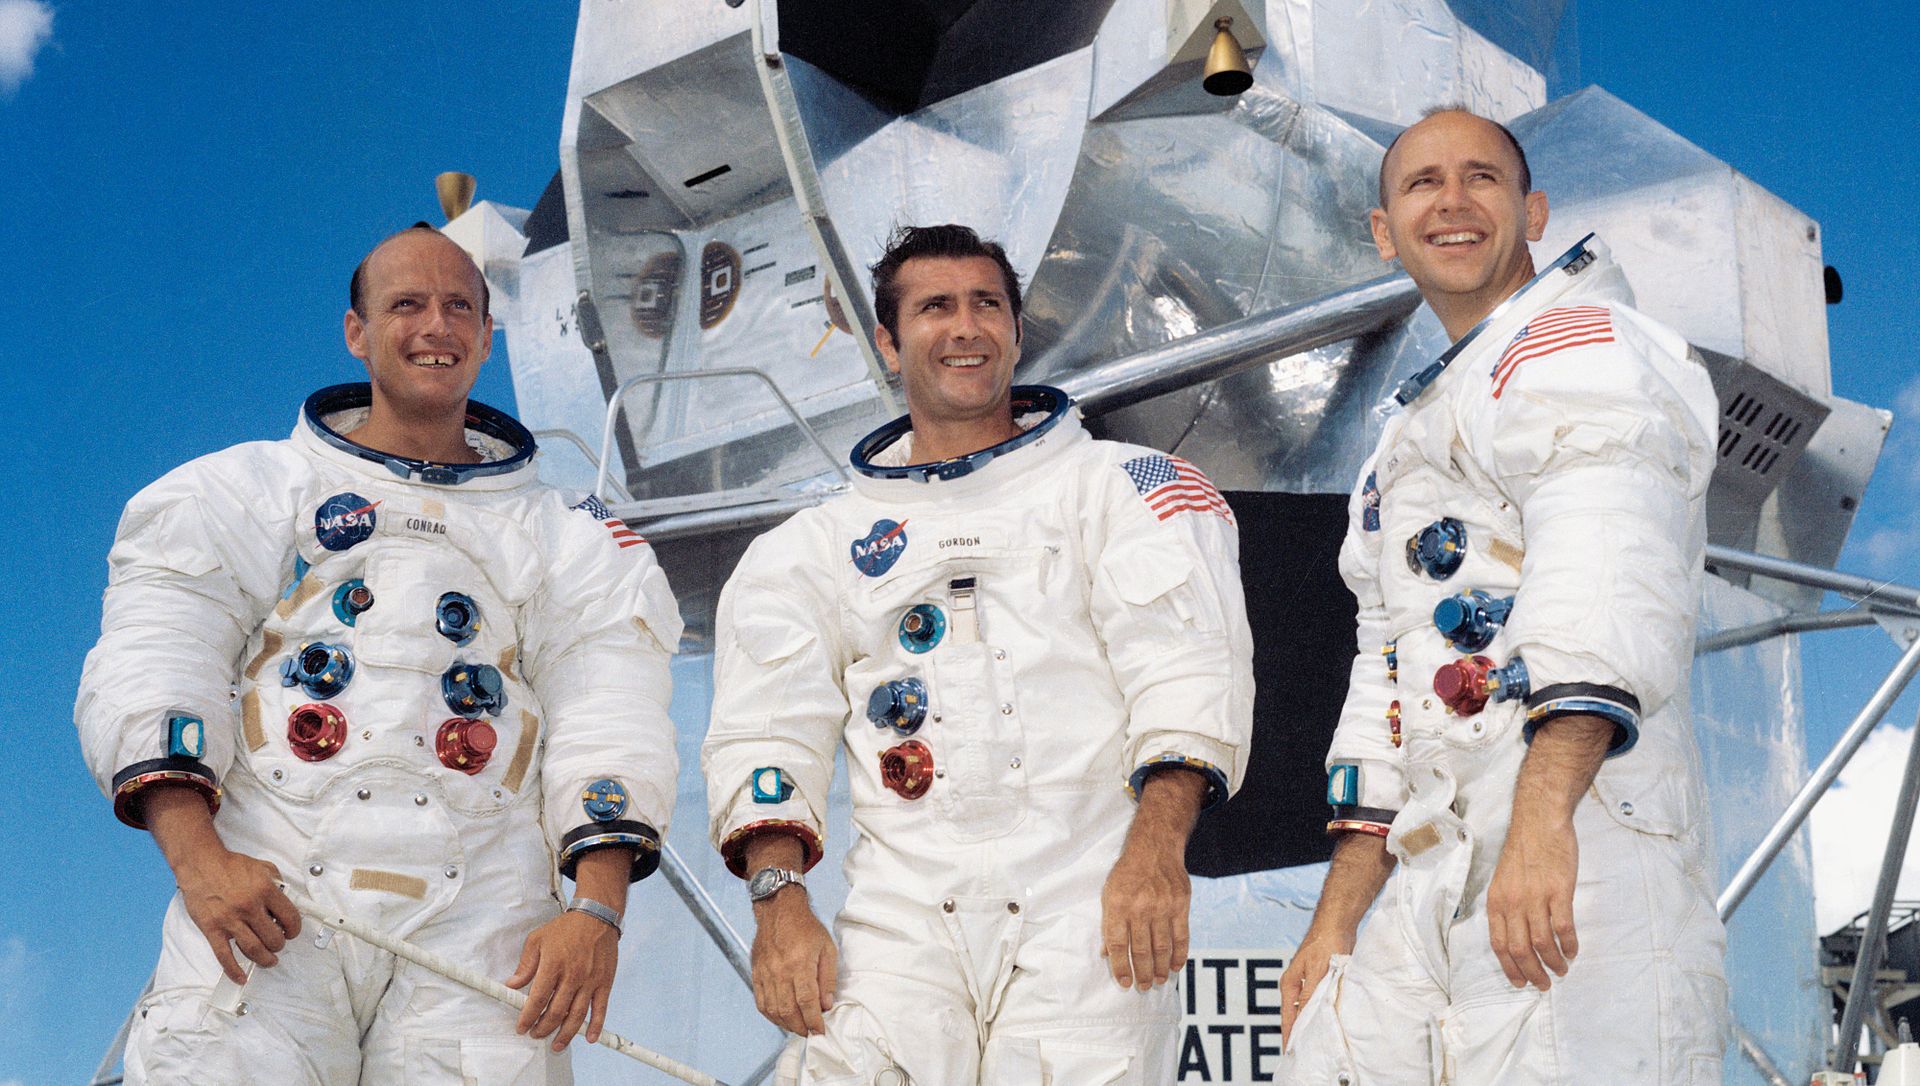 Portrait of the prime crew of the Apollo 12 lunar landing mission. From left to right they are: Commander, Charles "Pete" Conrad Jr.; Command Module pilot, Richard F. Gordon Jr.; and Lunar Module pilot, Alan L.Bean. The Apollo 12 mission was the second lunar landing mission in which the third and fourth American astronauts set foot upon the Moon. This mission was highlighted by the Lunar Module nicknamed "Intrepid" landing within a few hundred yards of a Surveyor probe which was sent to the Moon in April of 1967 on a mapping mission as a precursor to landing.